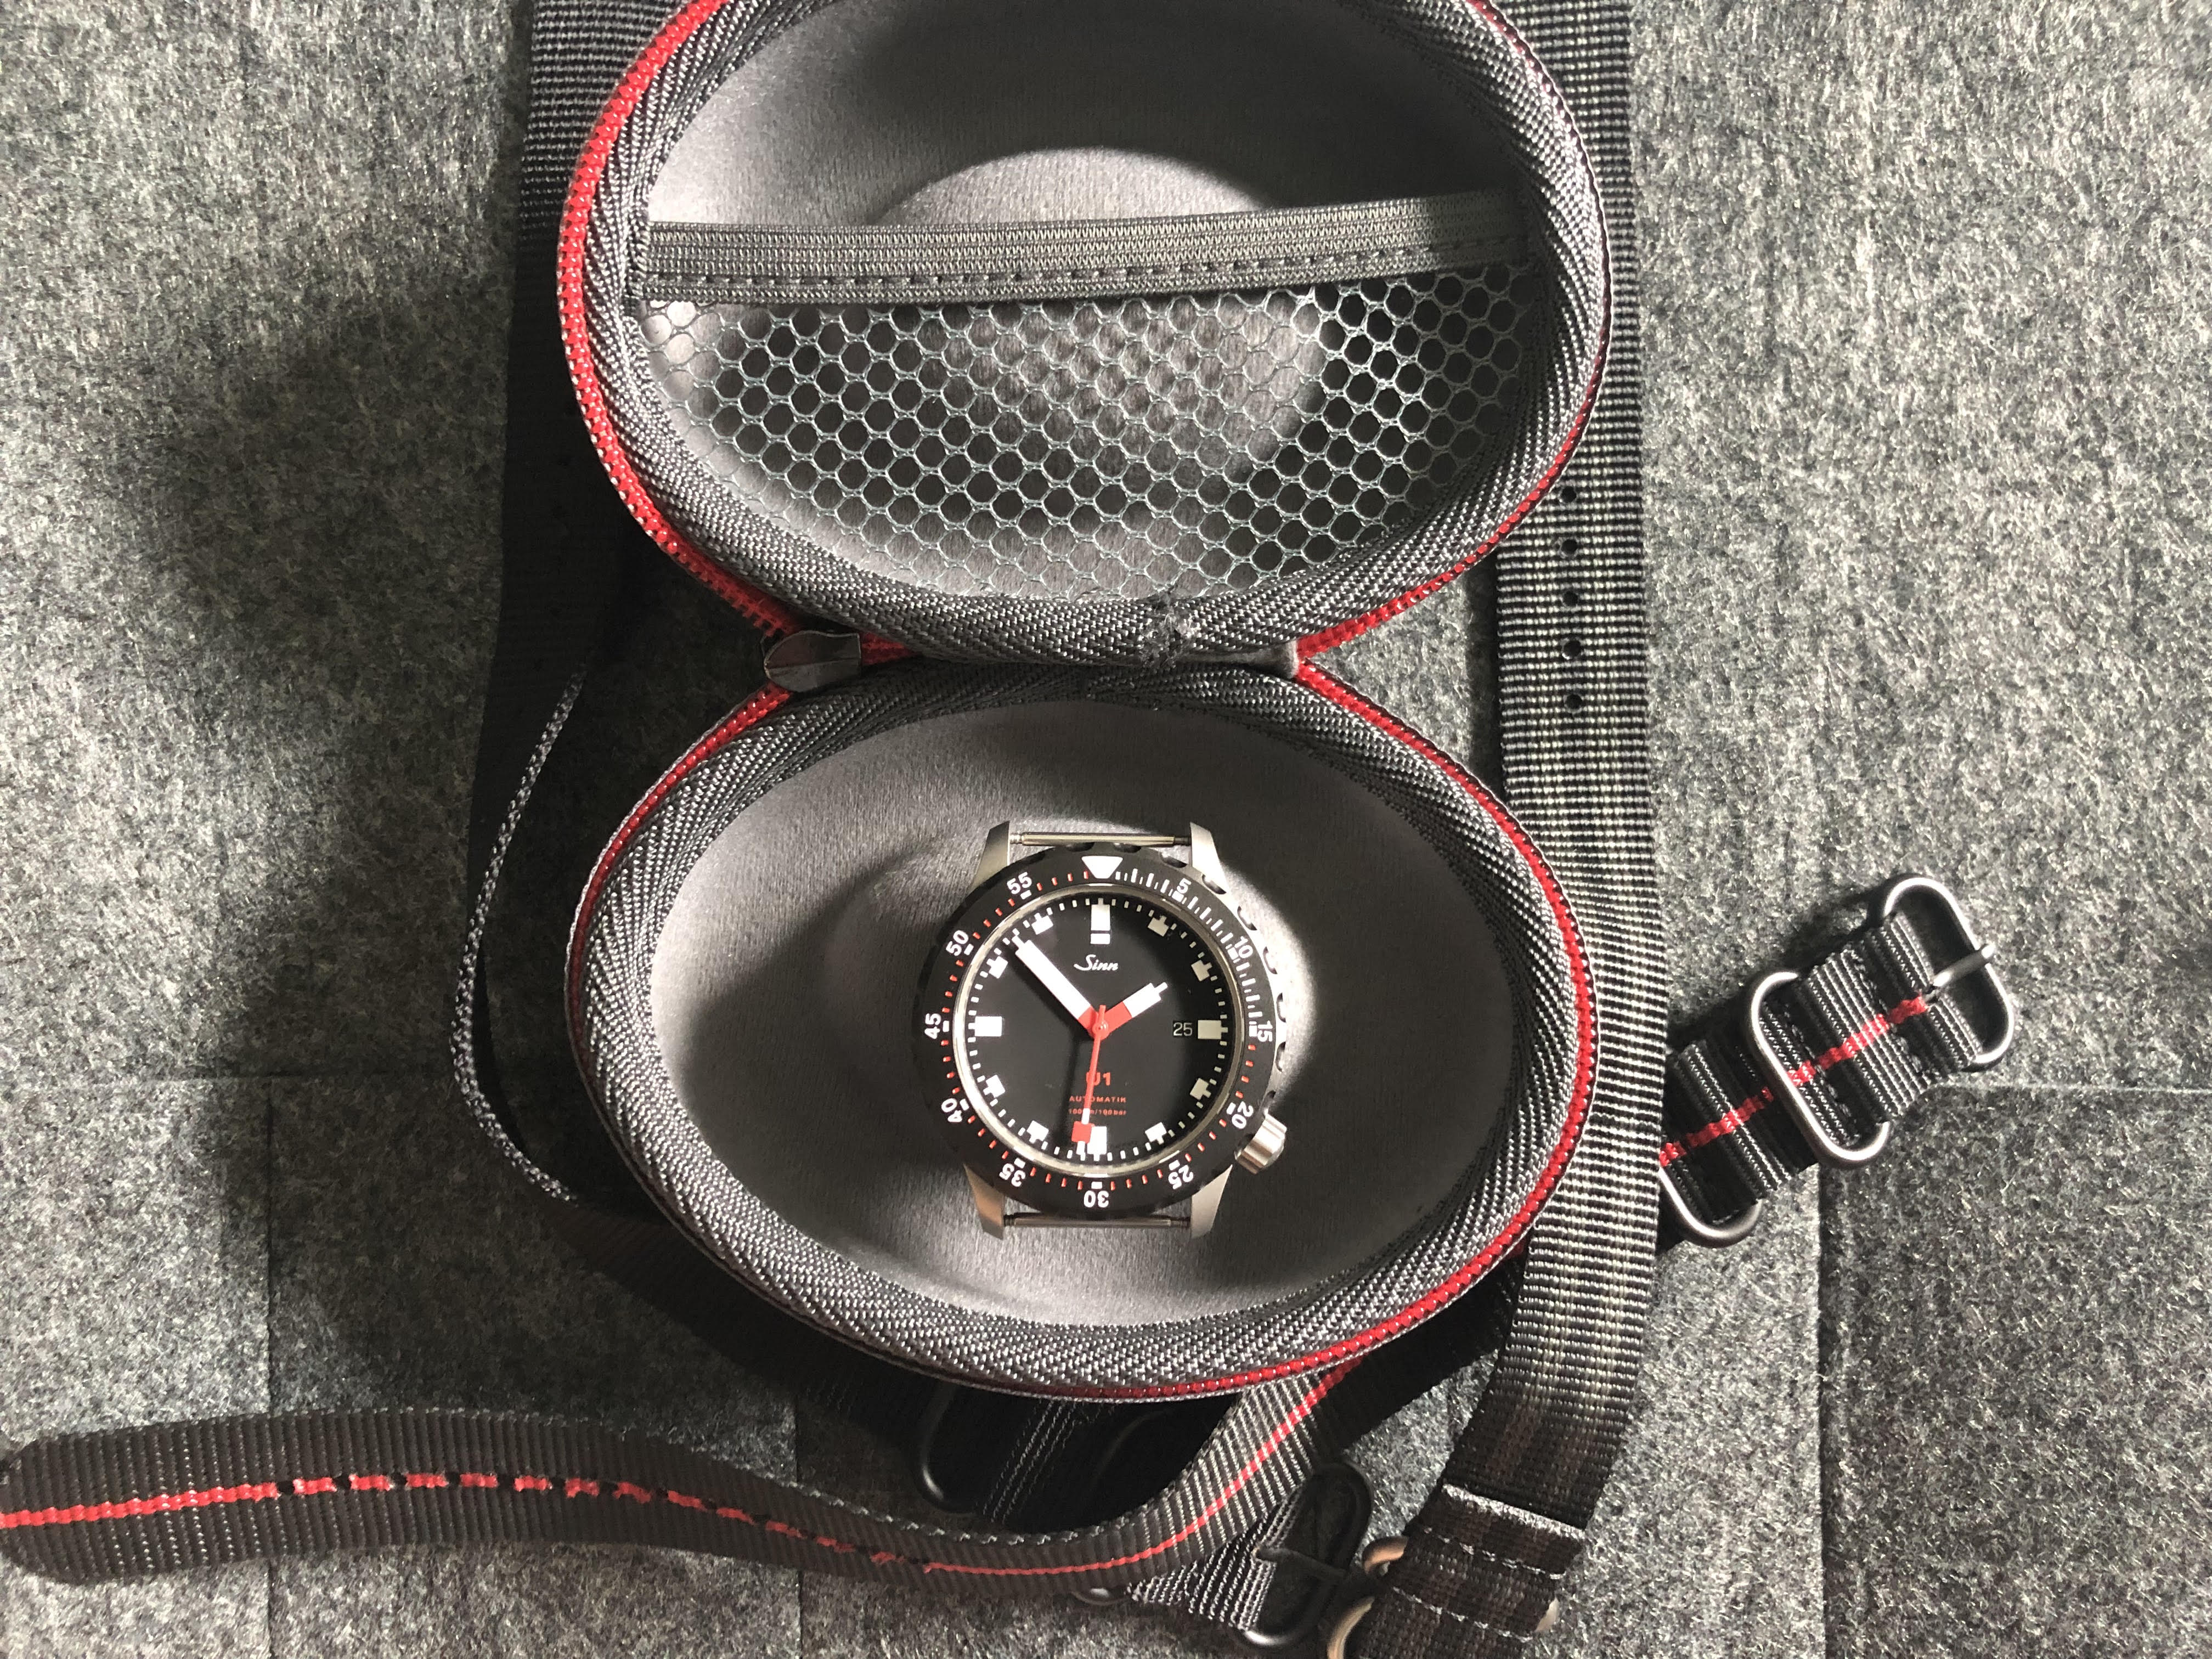 We've fulfilled more than half of our Watch Travel Cases. Our next shipment will be here very soon. After we've fulfilled the cases, we will close our pre-orders so do get some now at a good price!